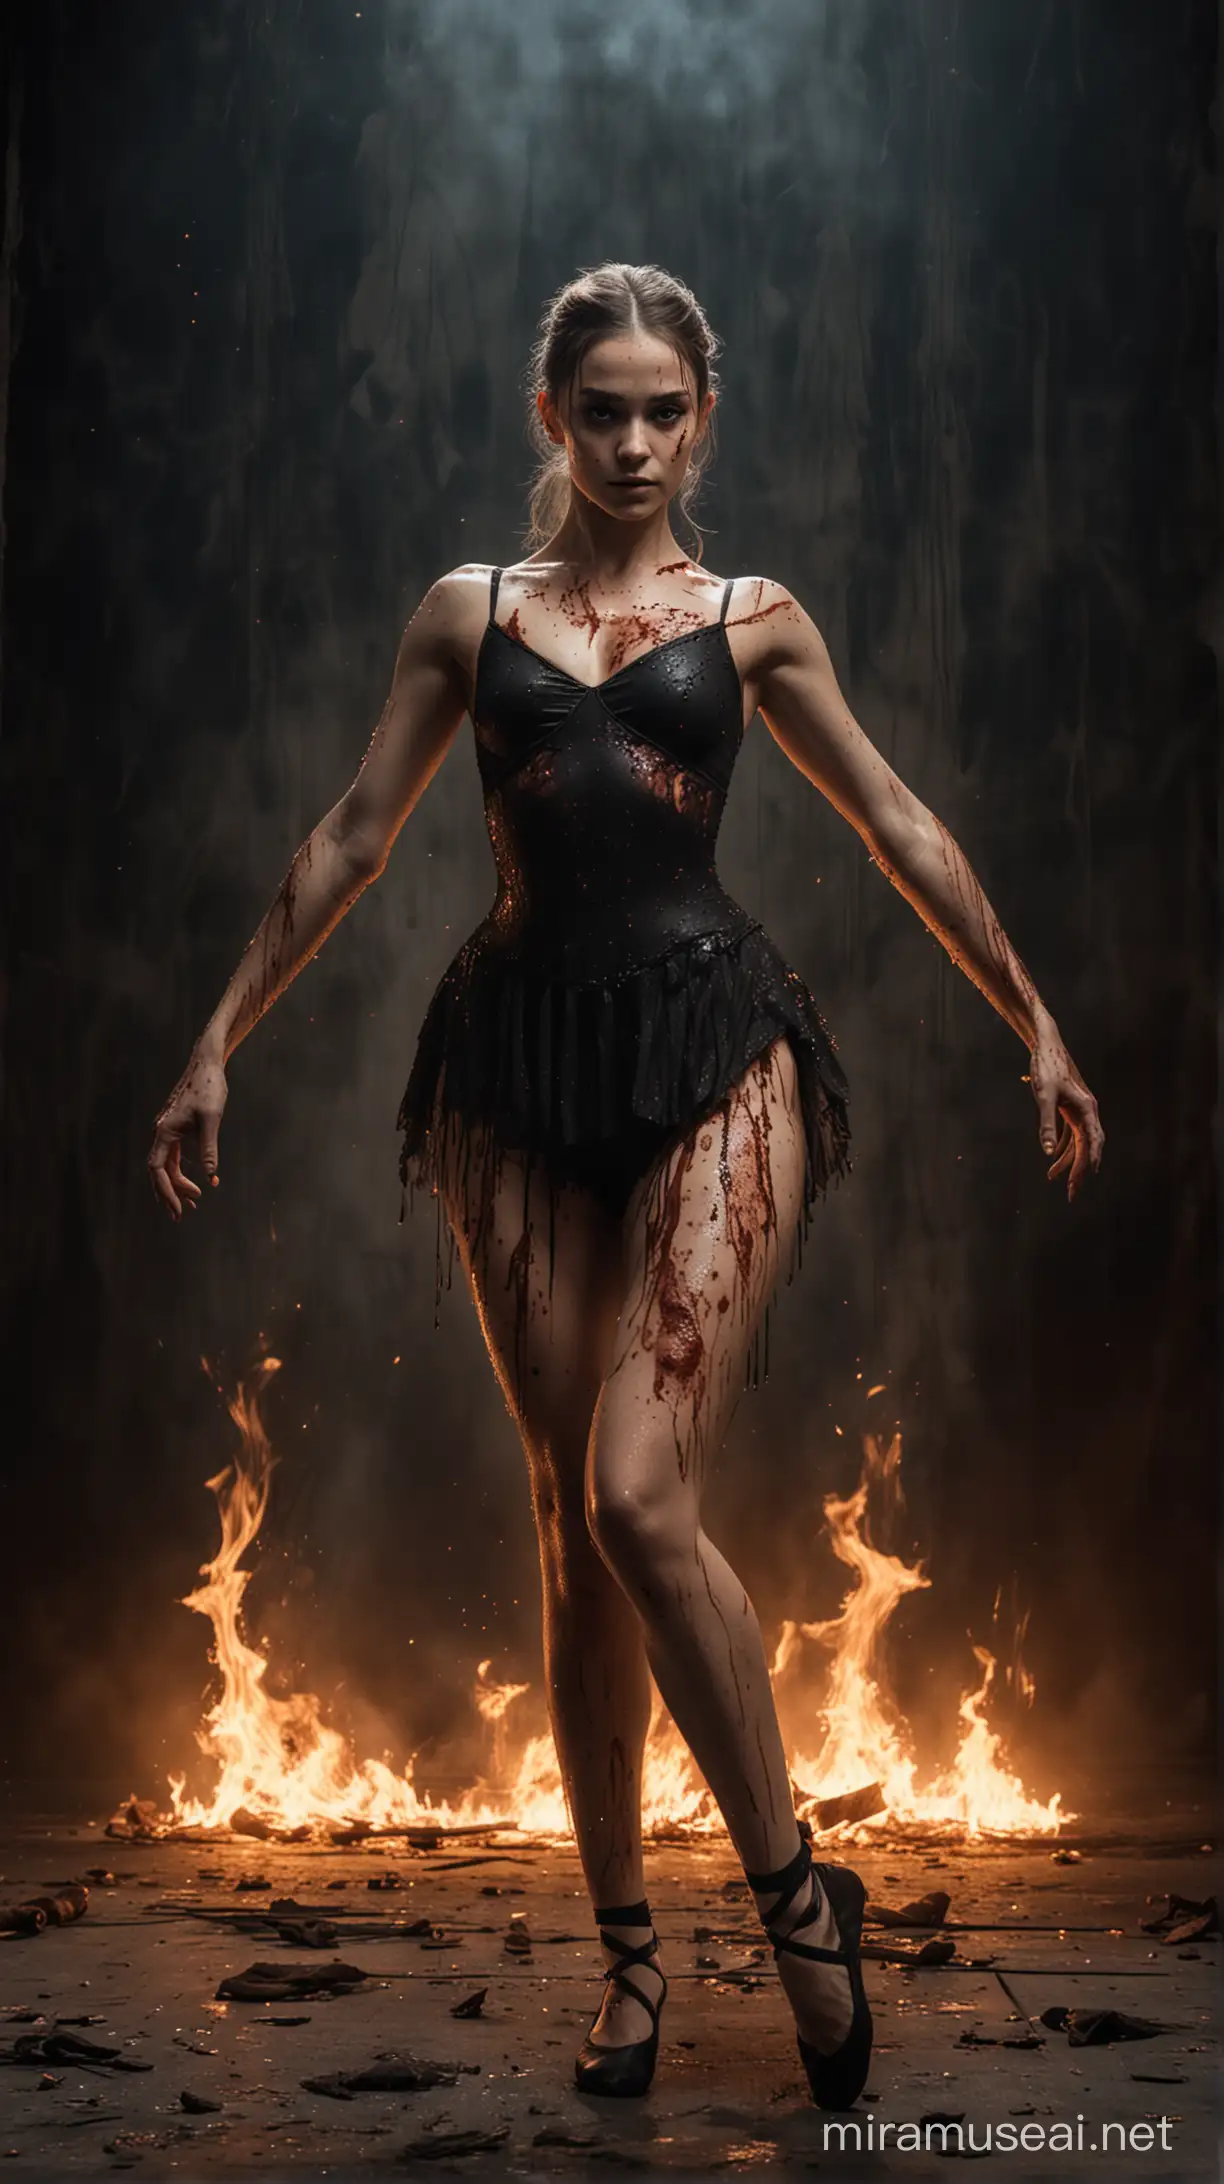 Movie Poster, dark ballet stage, at the center feminine ballerina with burn scars all over her body., burn marks on her legs and hands